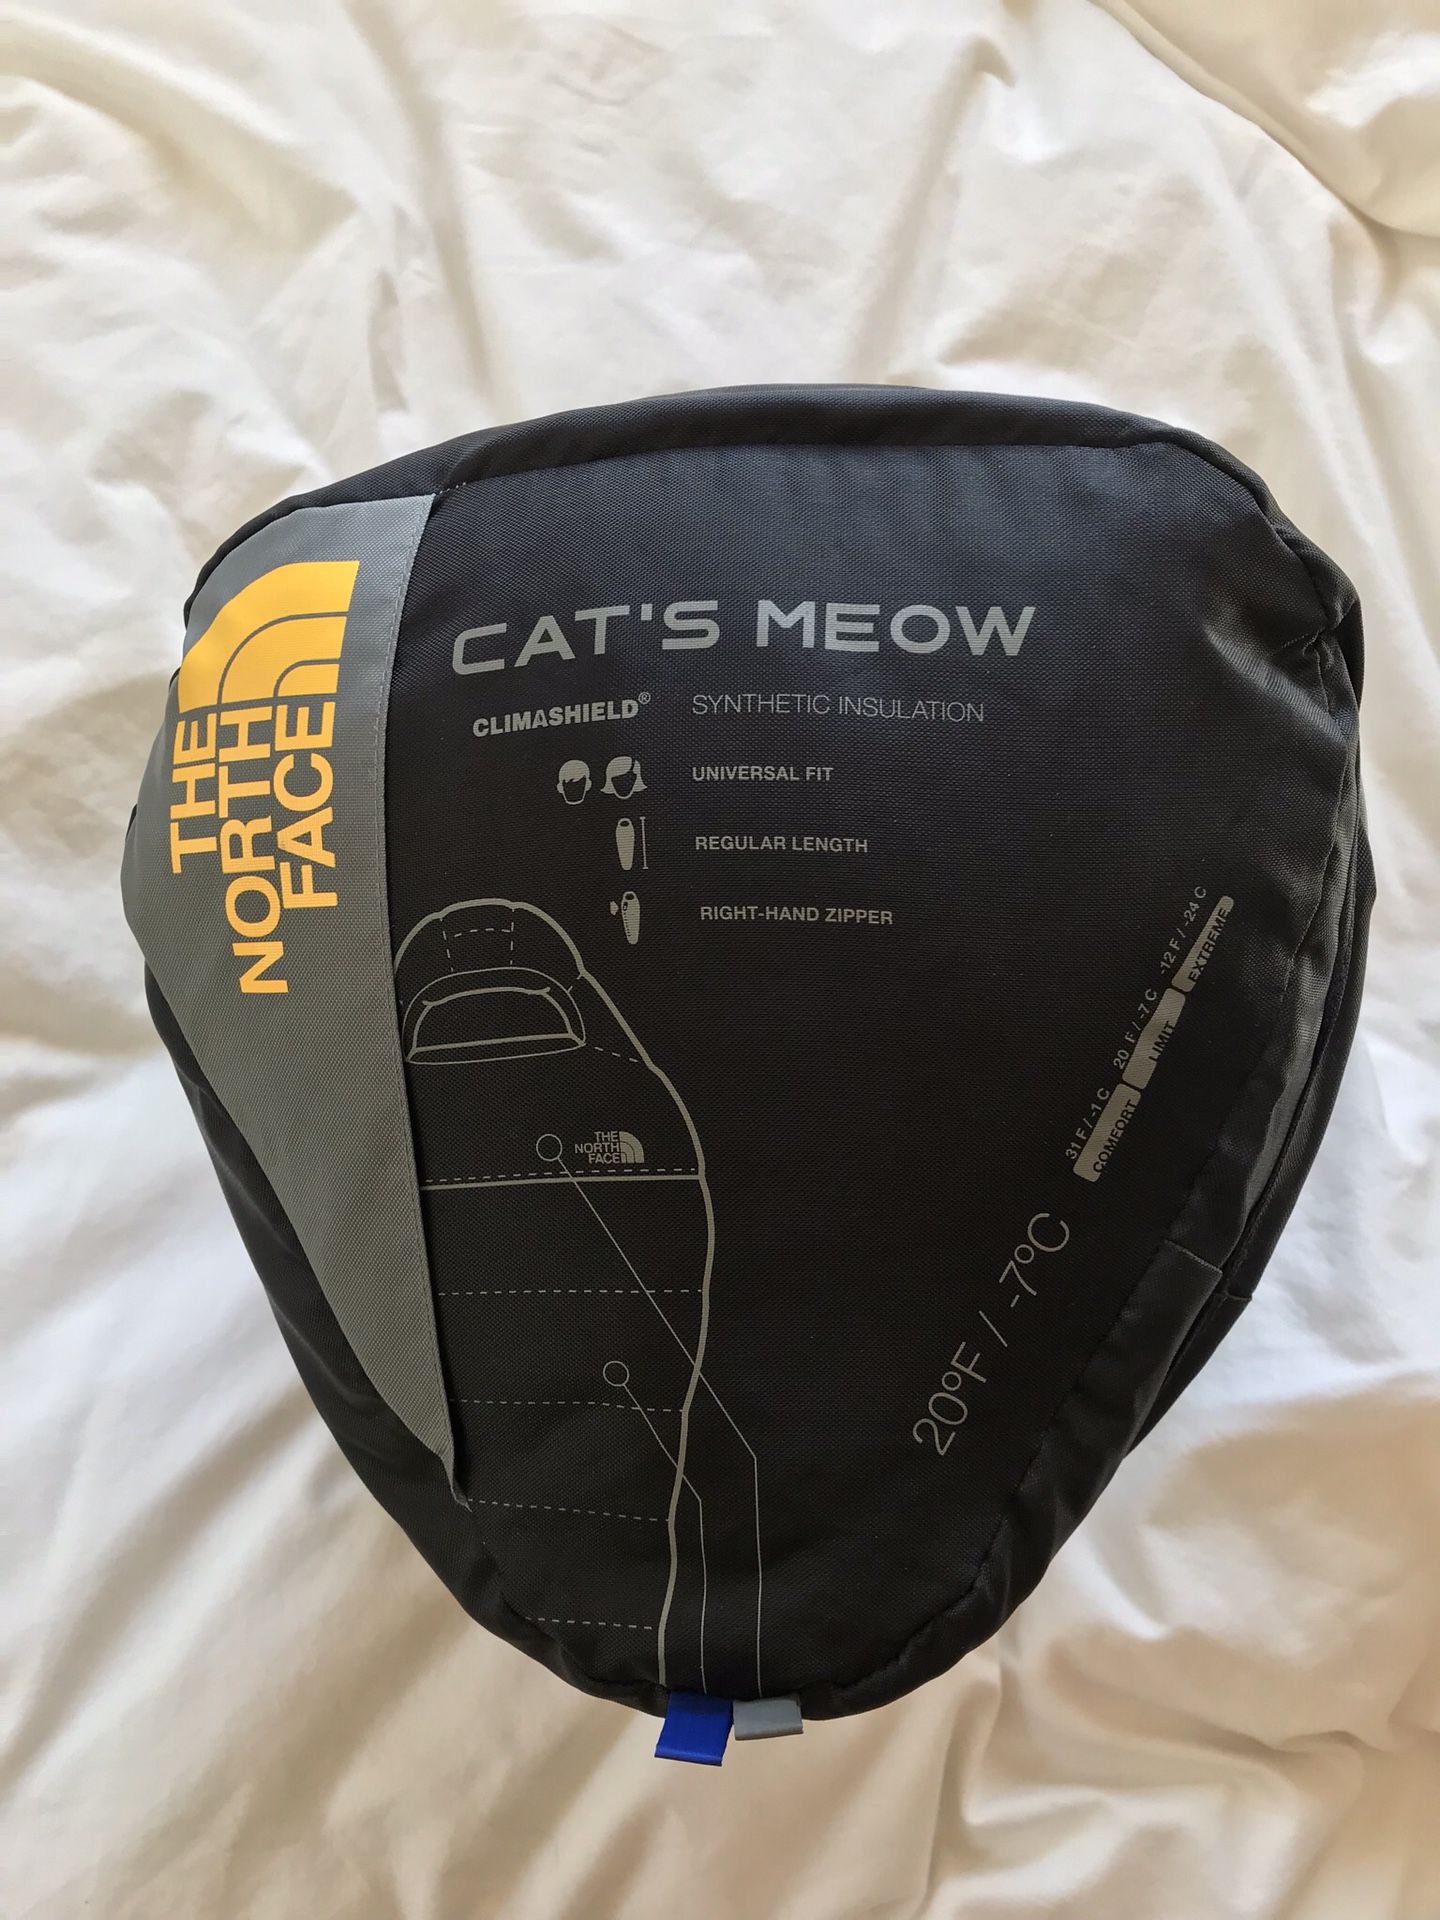 The North Face Women’s Cat’s Meow 20 Degree Sleeping Bag